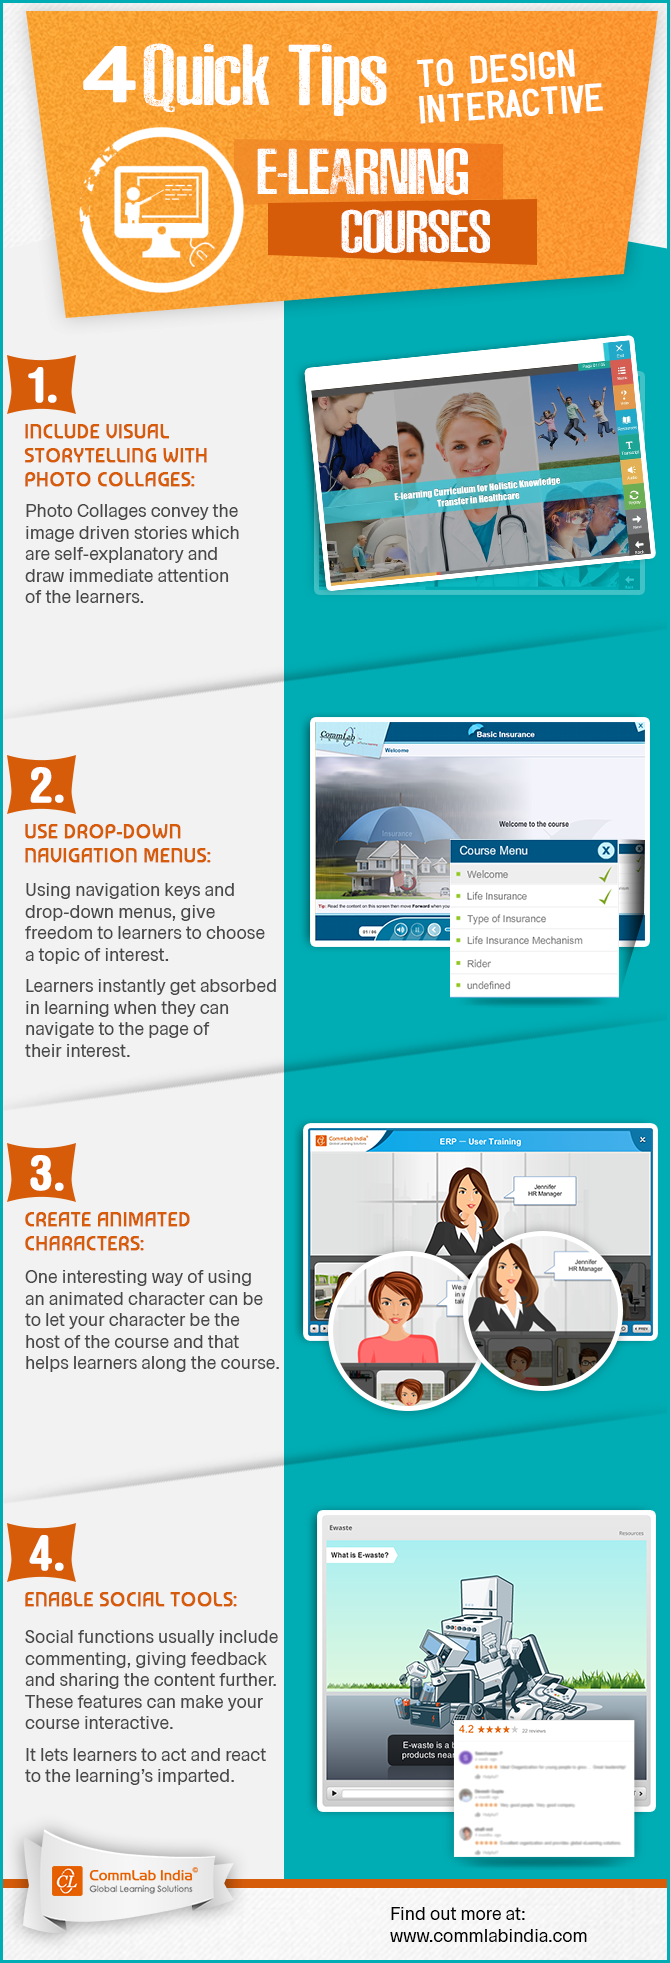 4 Quick Tips to Design Interactive E-learning Courses [Infographic]